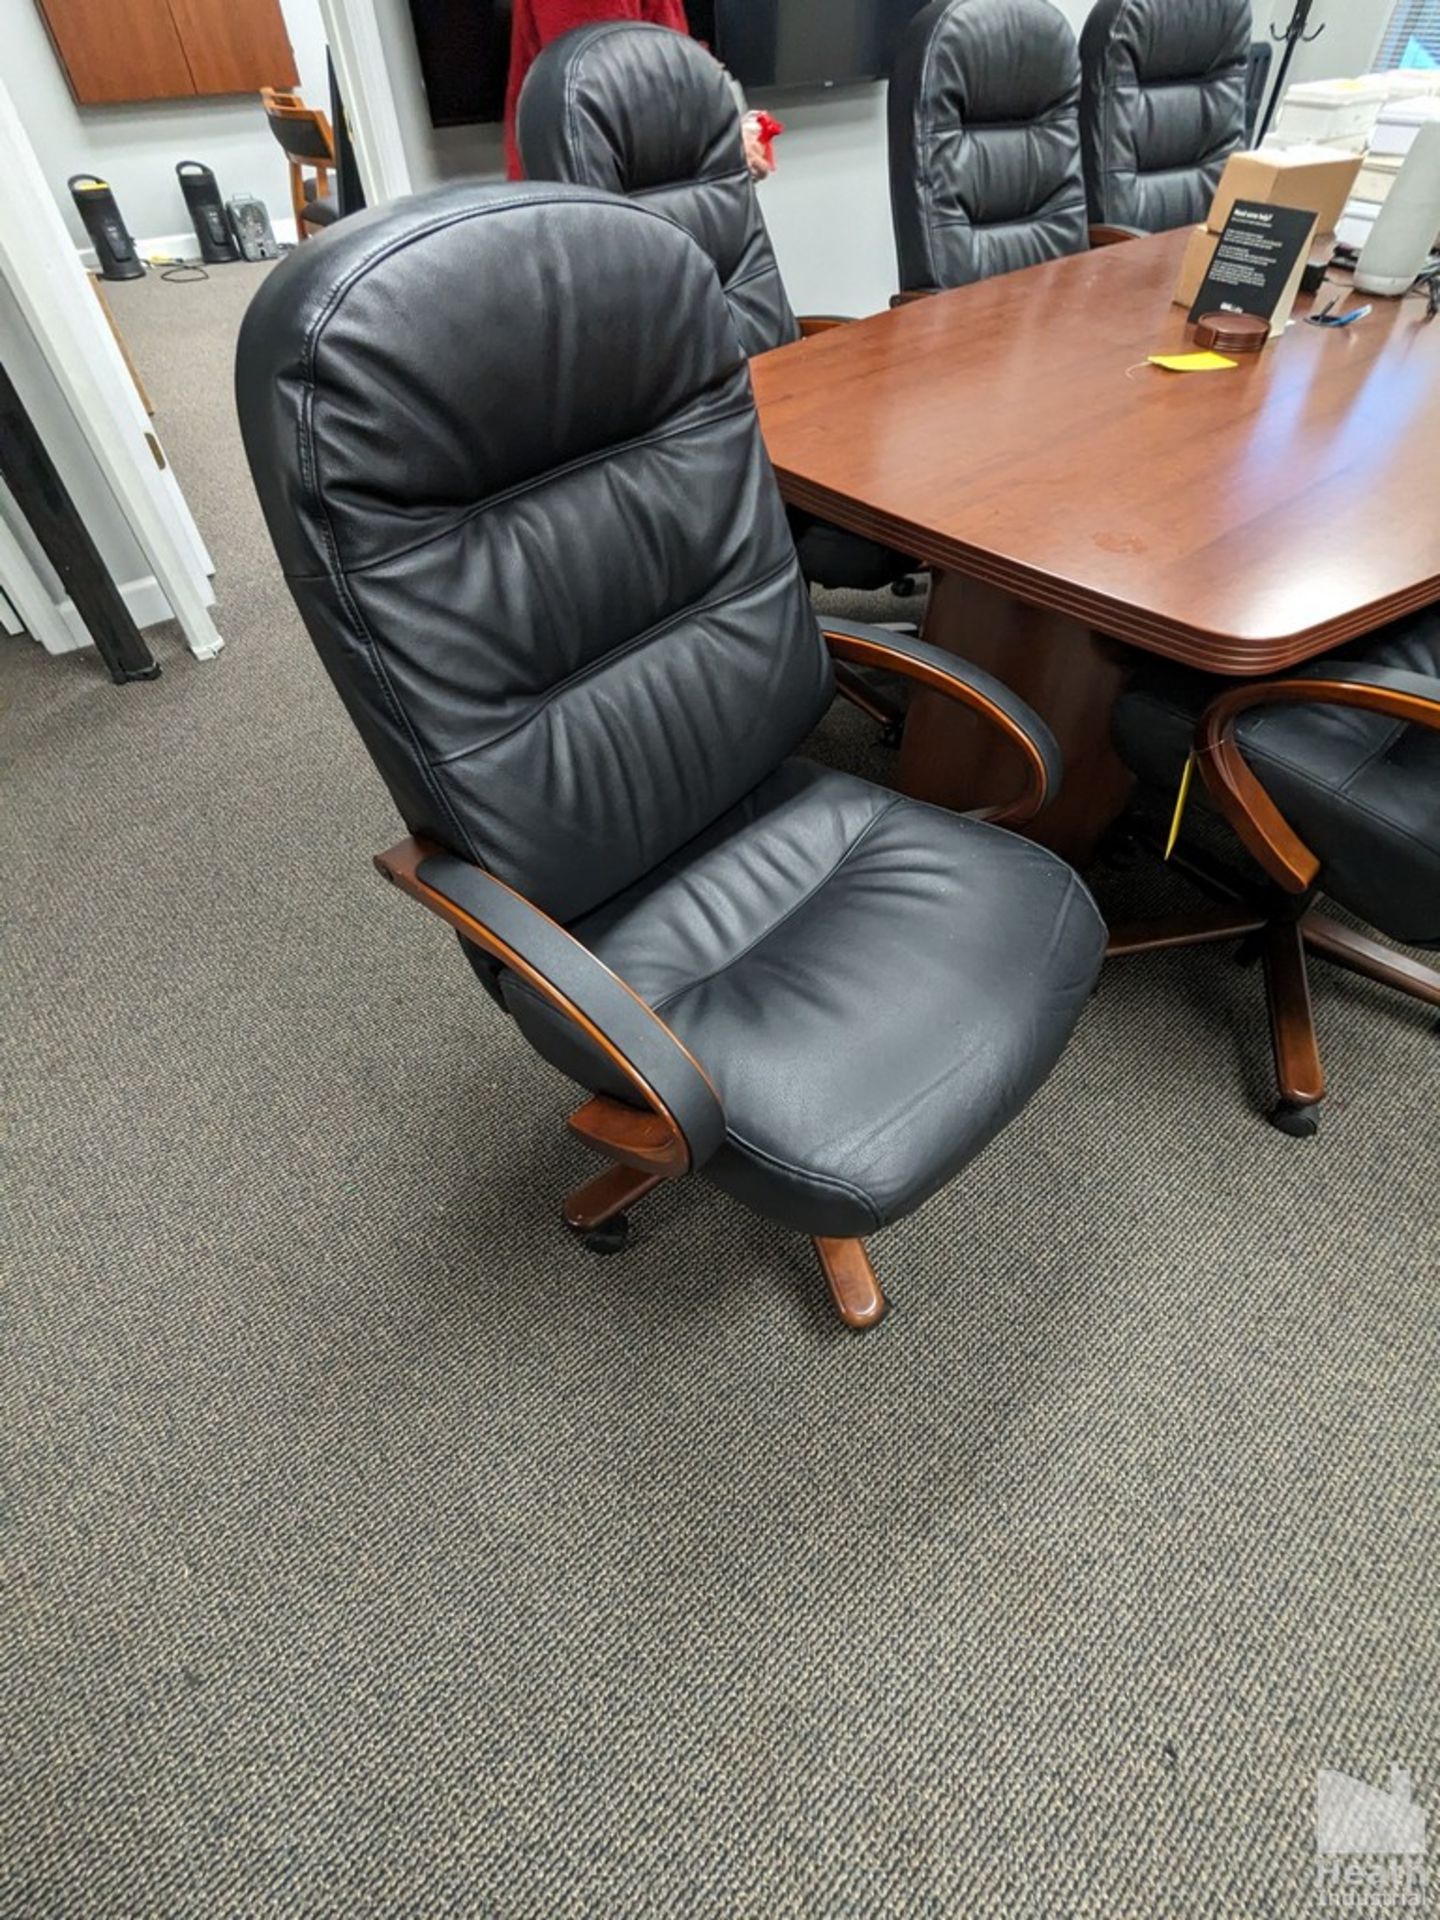 (8) EXECUTIVE CONFERENCE TABLE CHAIRS - Image 2 of 2